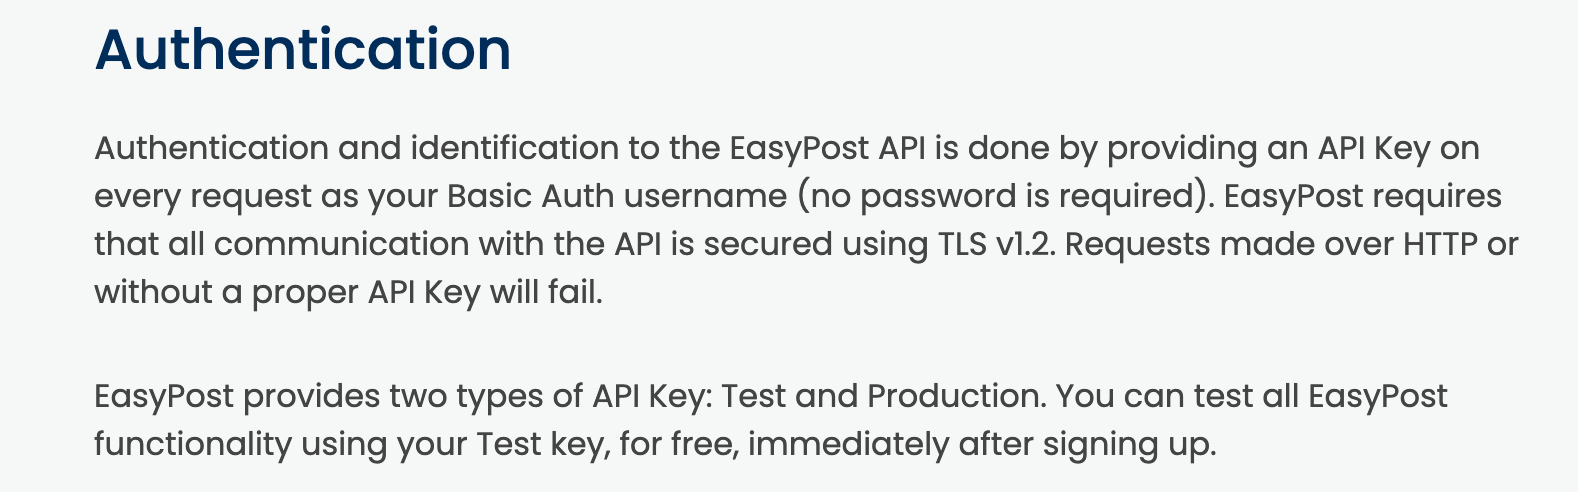 EasyPost Authentication Overview